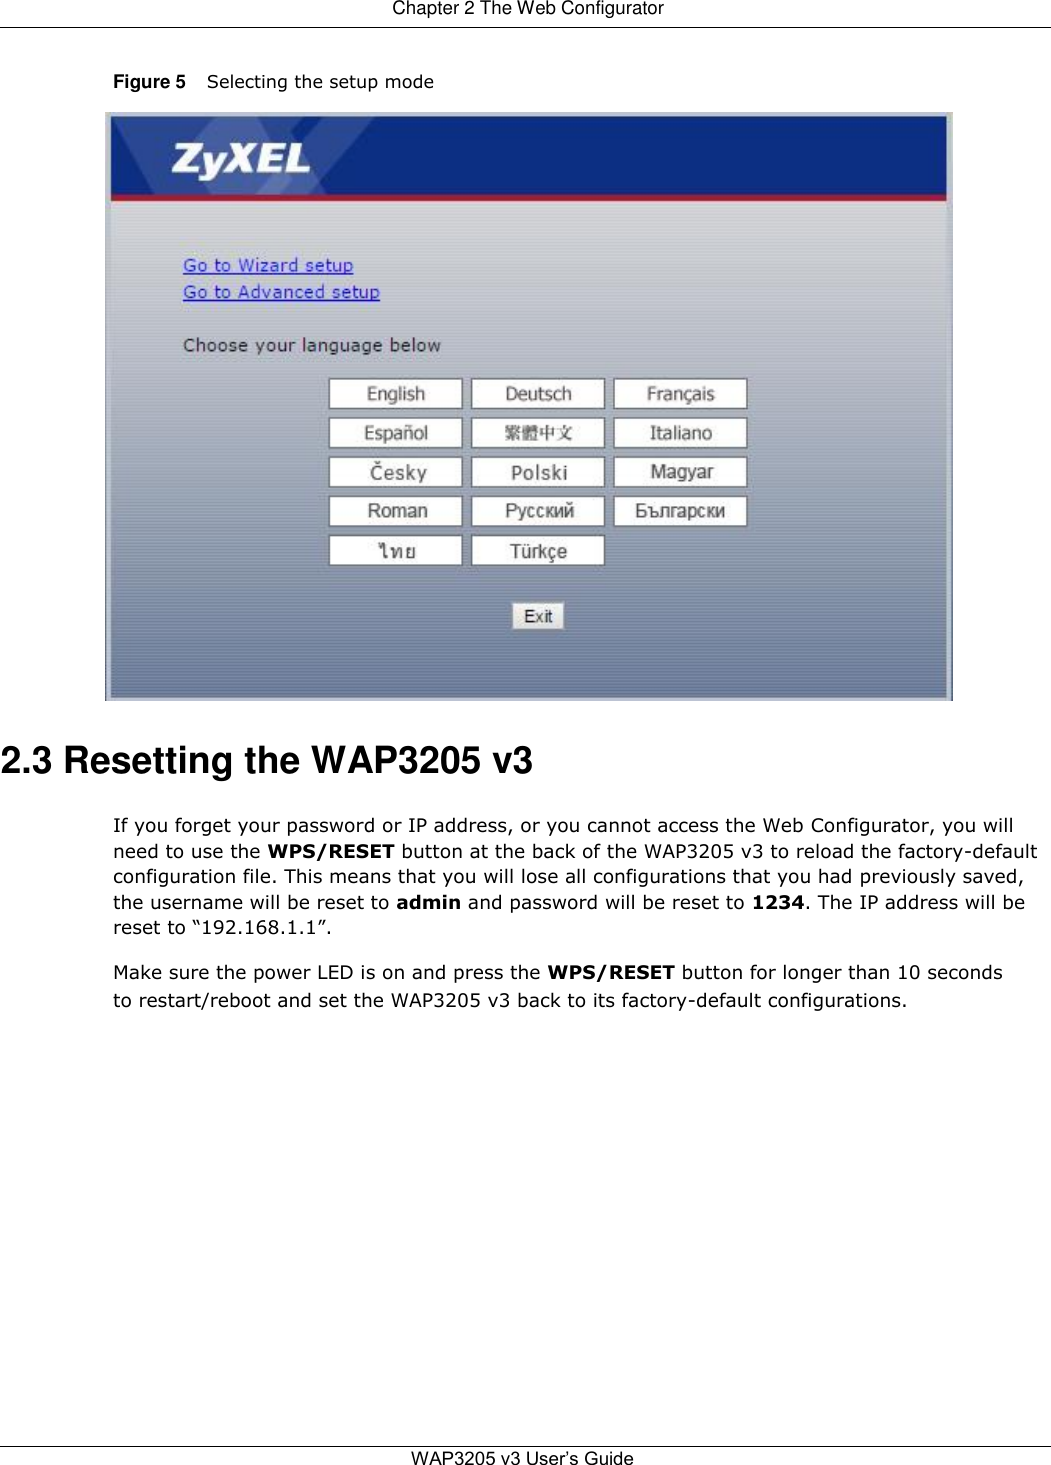 Chapter 2 The Web Configurator   Figure 5 Selecting the setup mode                                2.3 Resetting the WAP3205 v3  If you forget your password or IP address, or you cannot access the Web Configurator, you will need to use the WPS/RESET button at the back of the WAP3205 v3 to reload the factory-default configuration file. This means that you will lose all configurations that you had previously saved, the username will be reset to admin and password will be reset to 1234. The IP address will be reset to “192.168.1.1”.  Make sure the power LED is on and press the WPS/RESET button for longer than 10 seconds to restart/reboot and set the WAP3205 v3 back to its factory-default configurations.                     WAP3205 v3 User’s Guide   